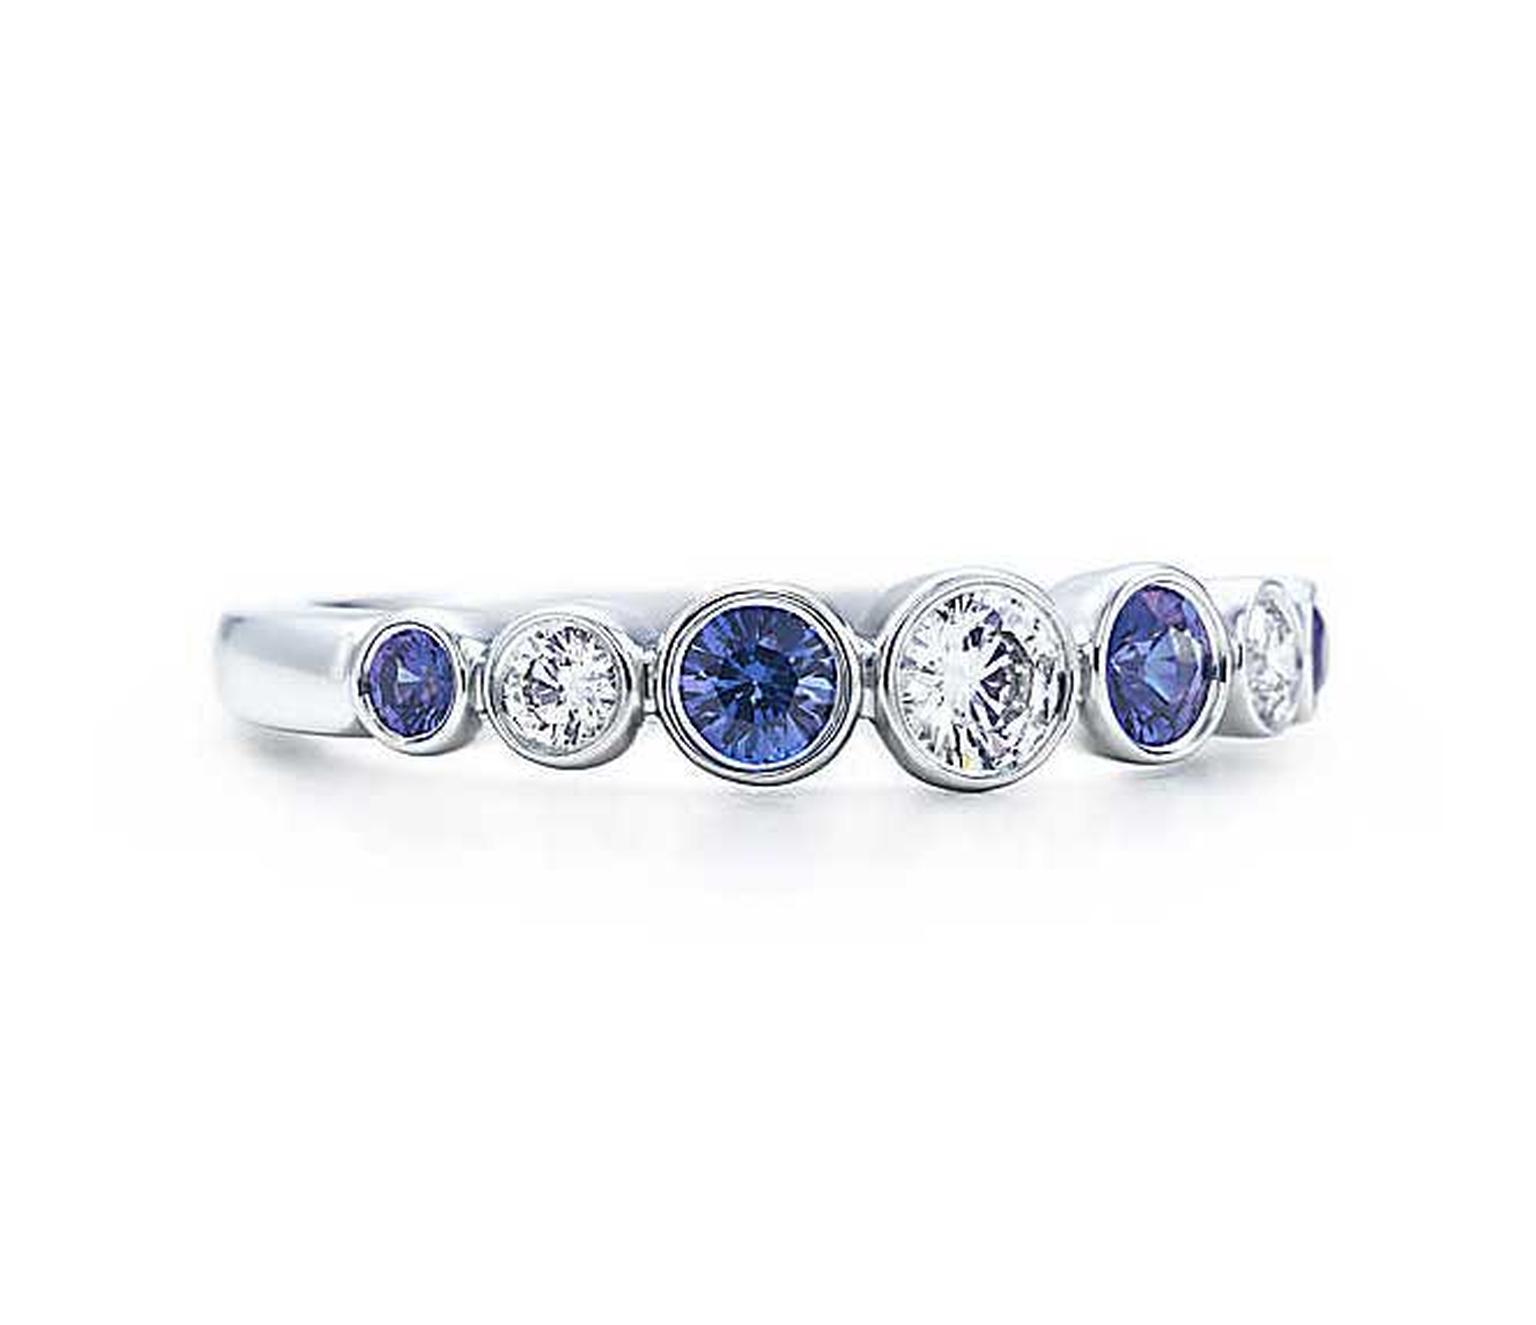 Tiffany Jazz ring in platinum with blue sapphires and diamonds.